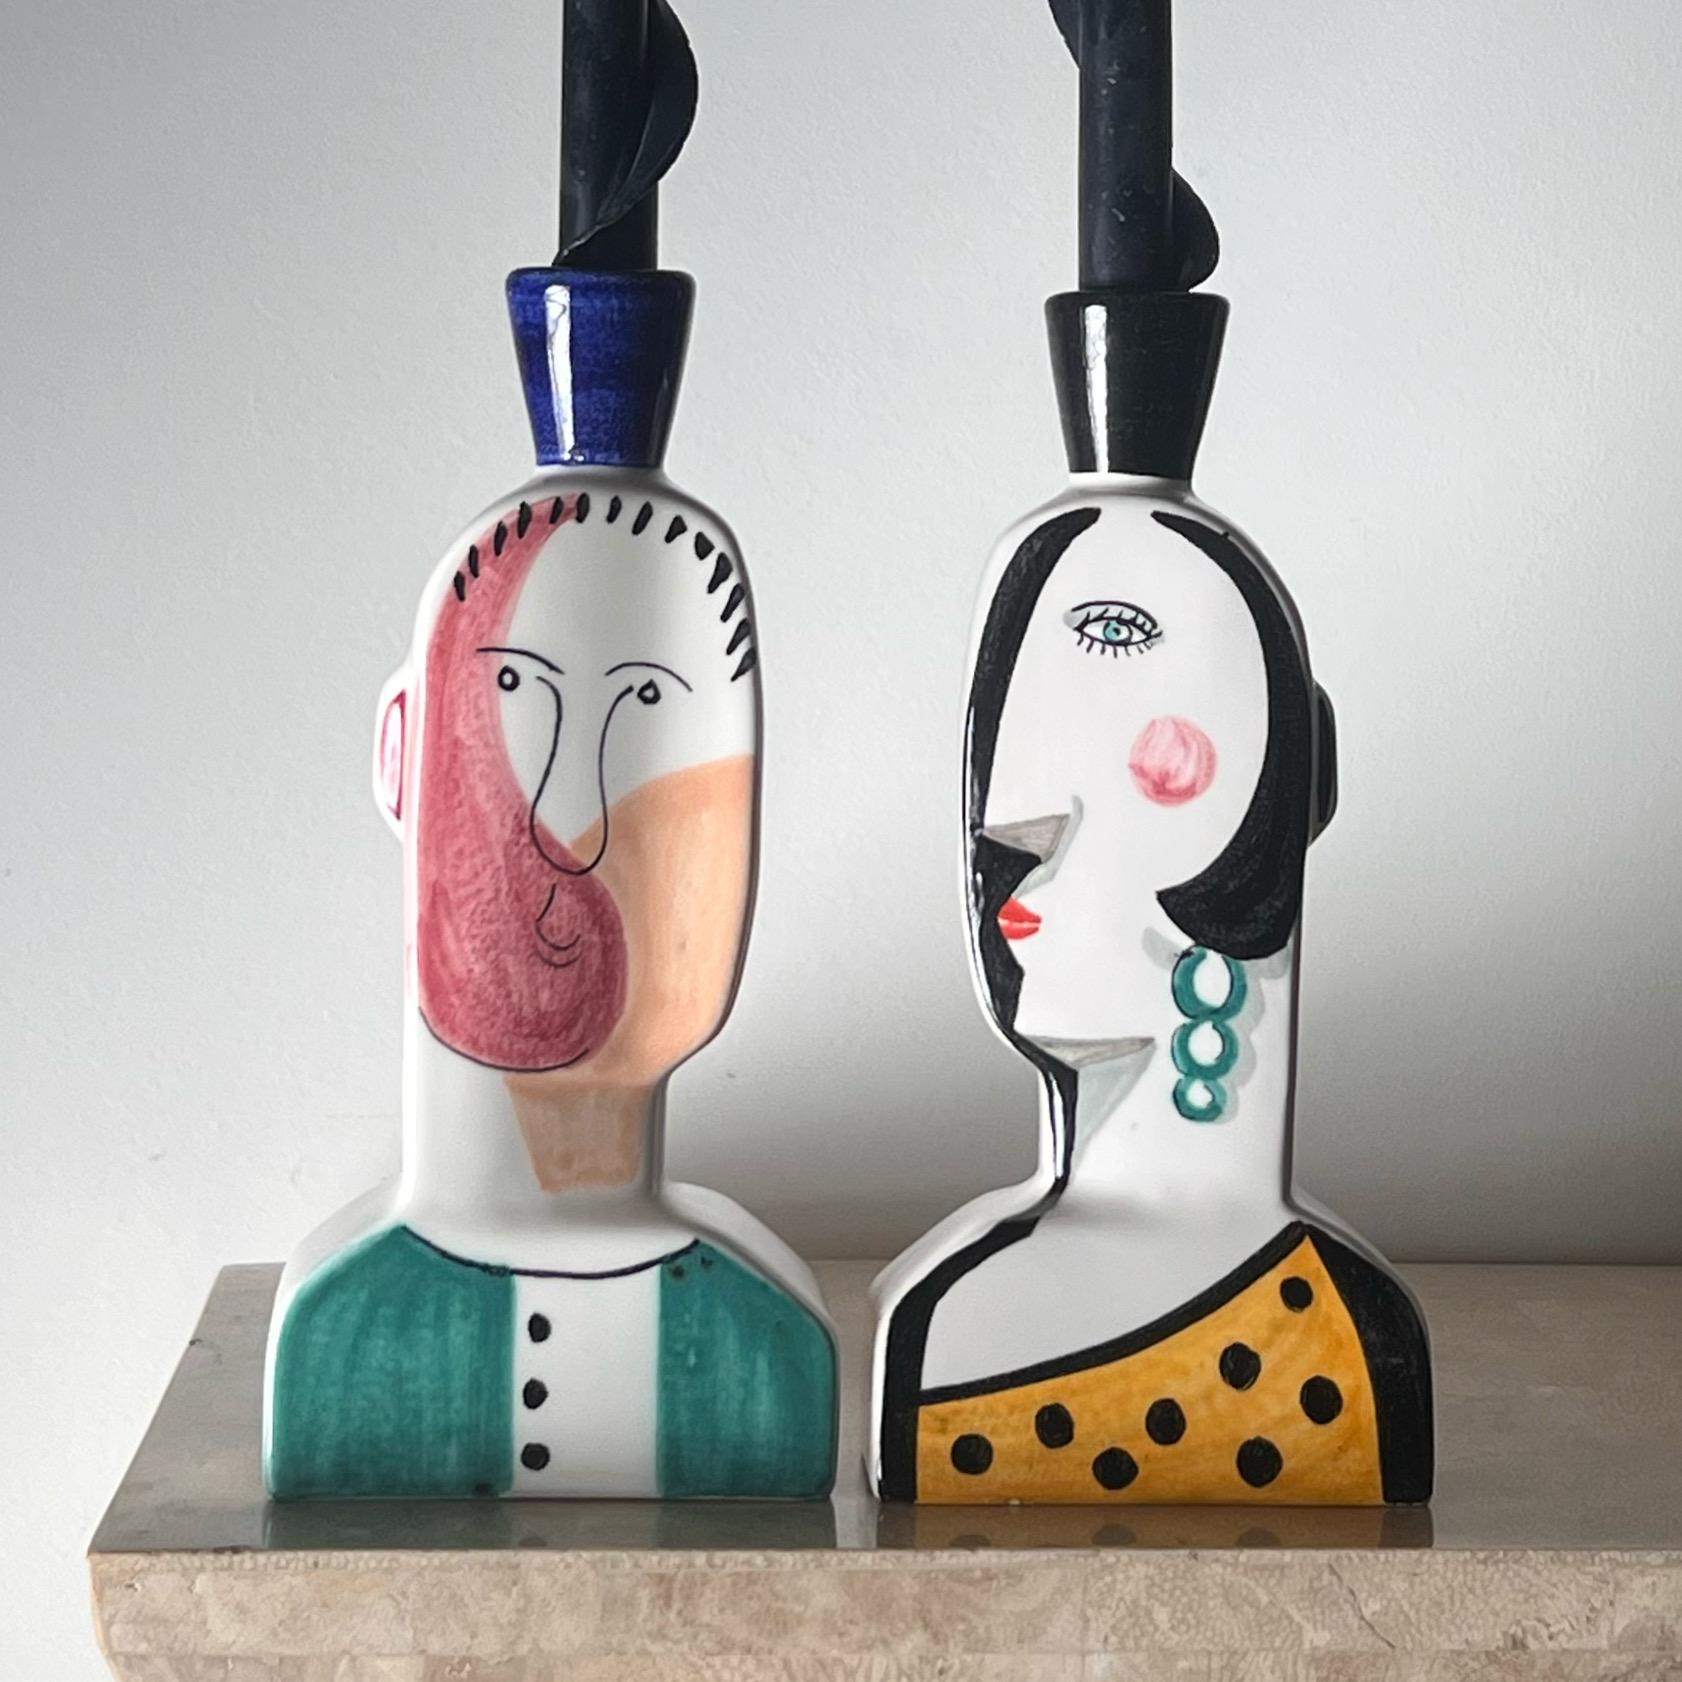 Spanish Cubist figurative “Face” candlesticks, signed by artist, 20th century 9